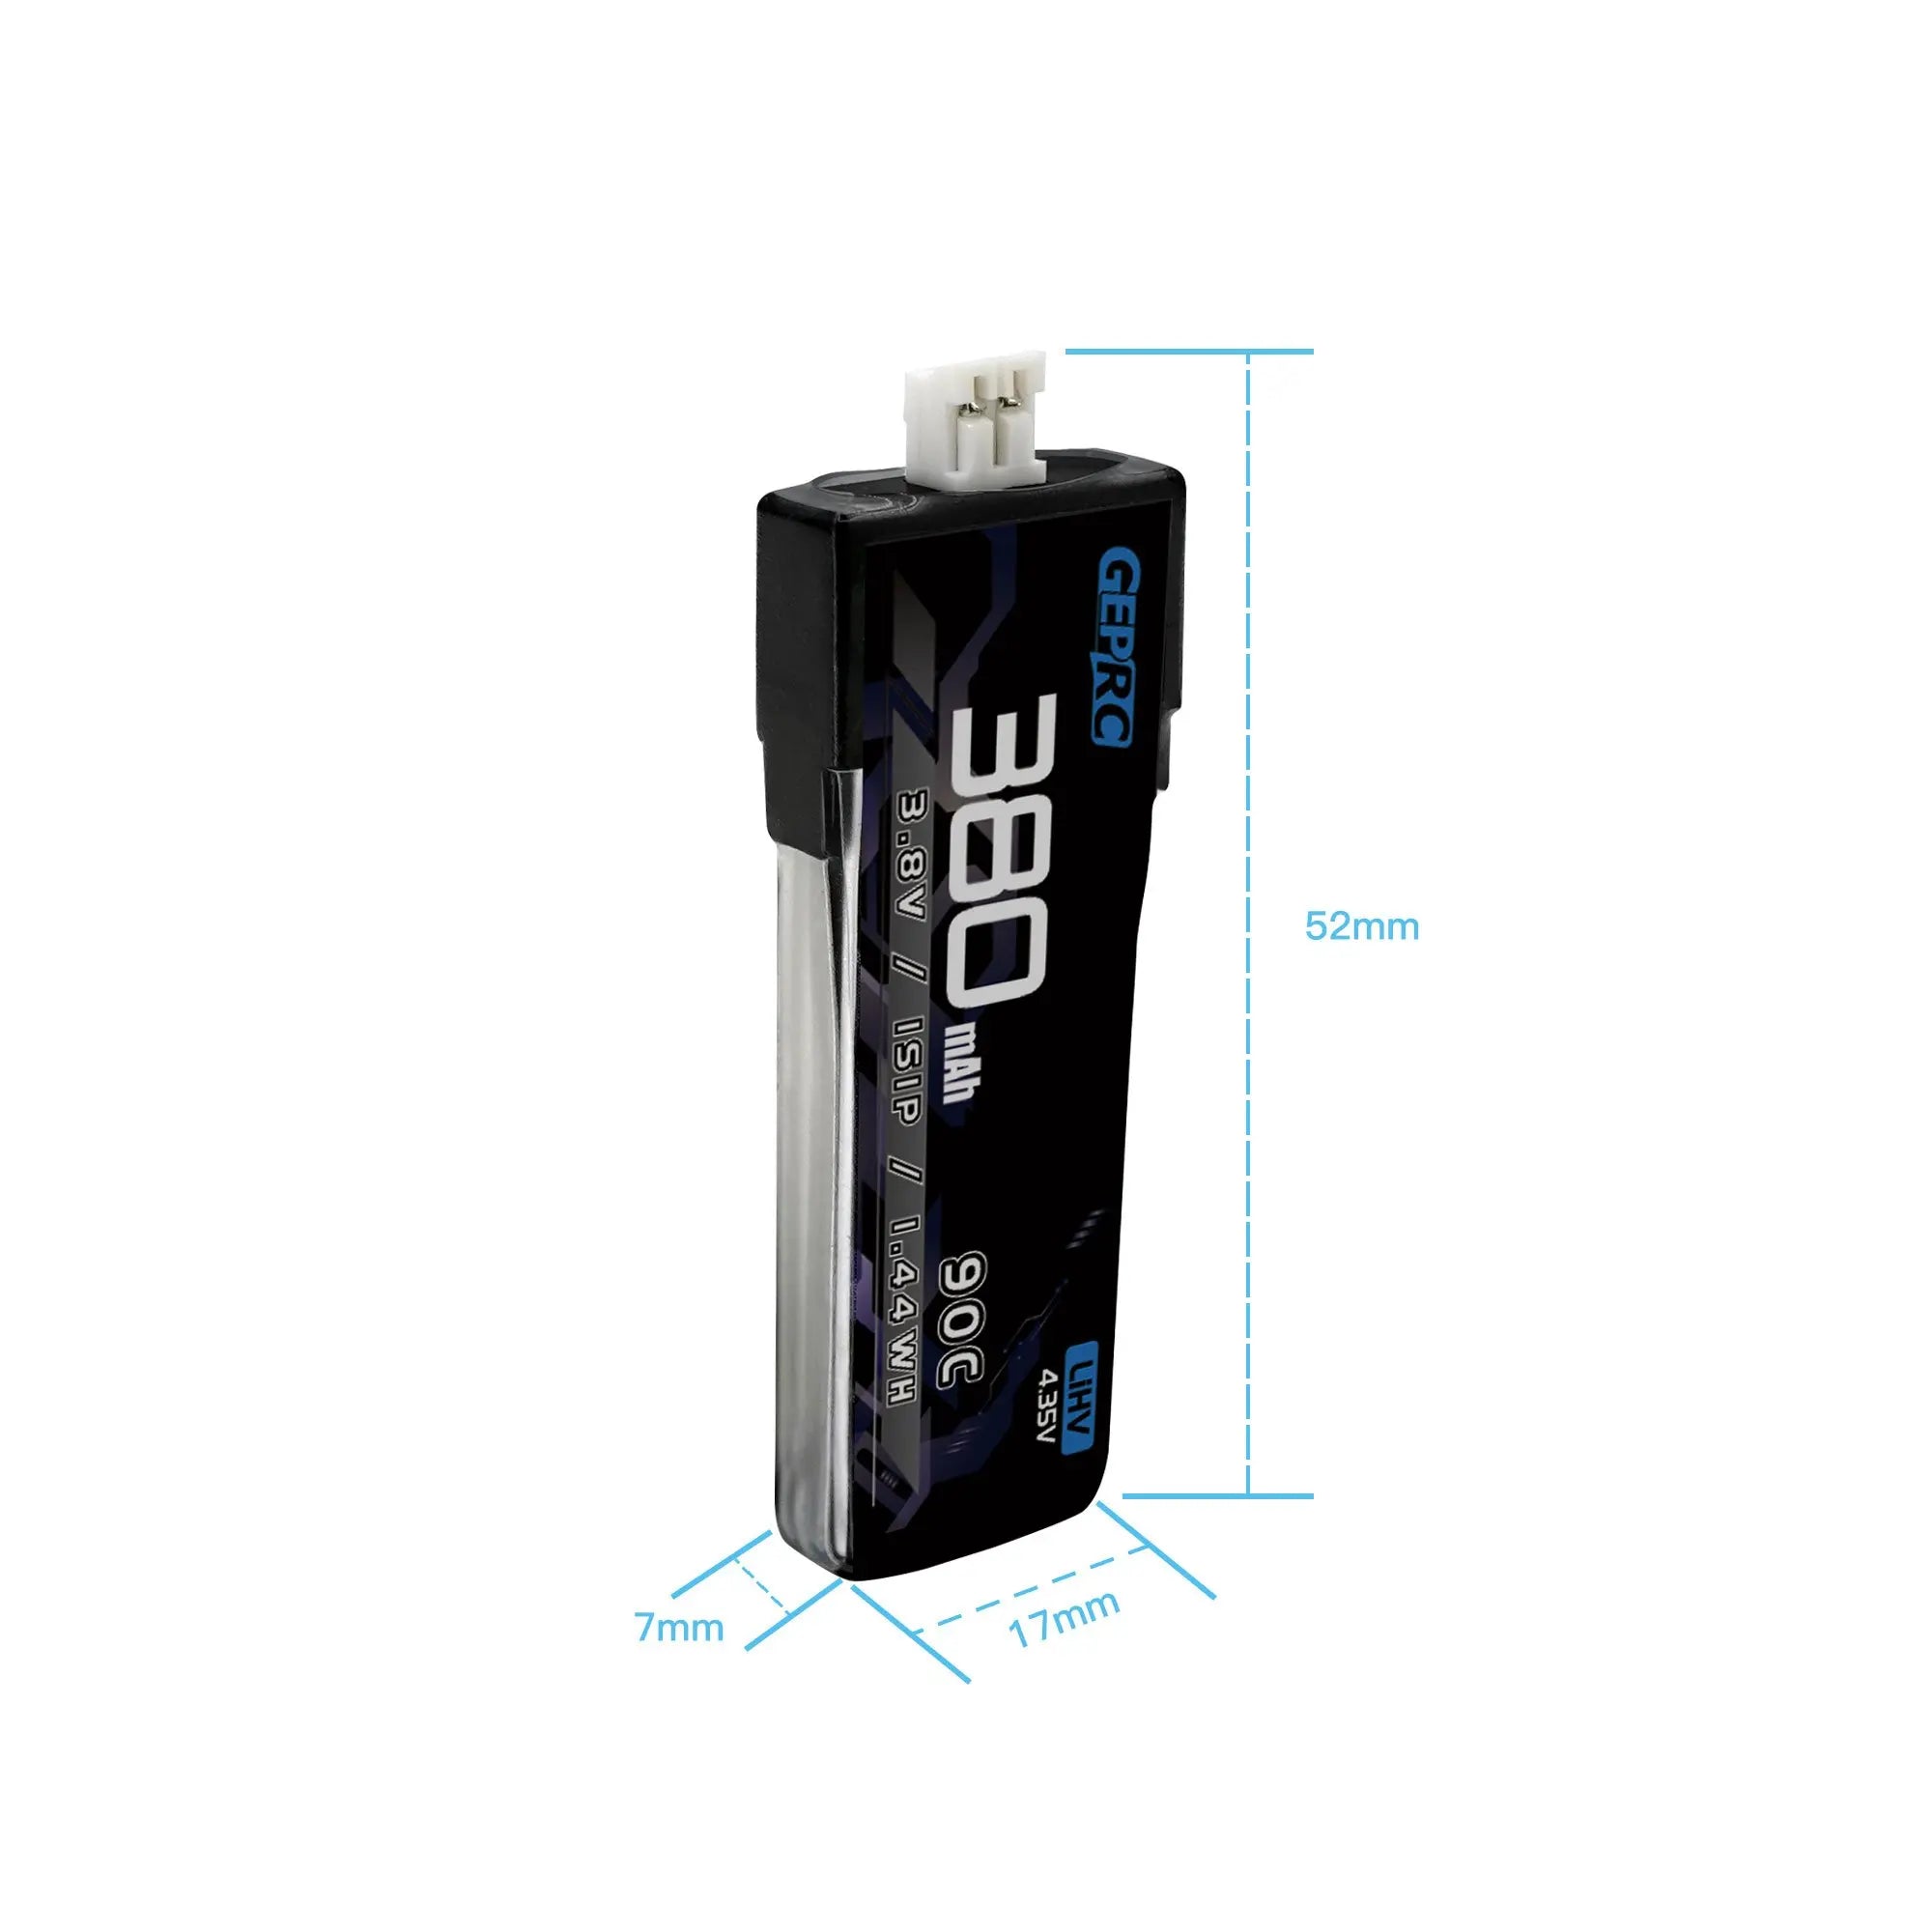 GEPRC 1S 380mAh 90C Battery, Check carefully whether the battery and connector are normal